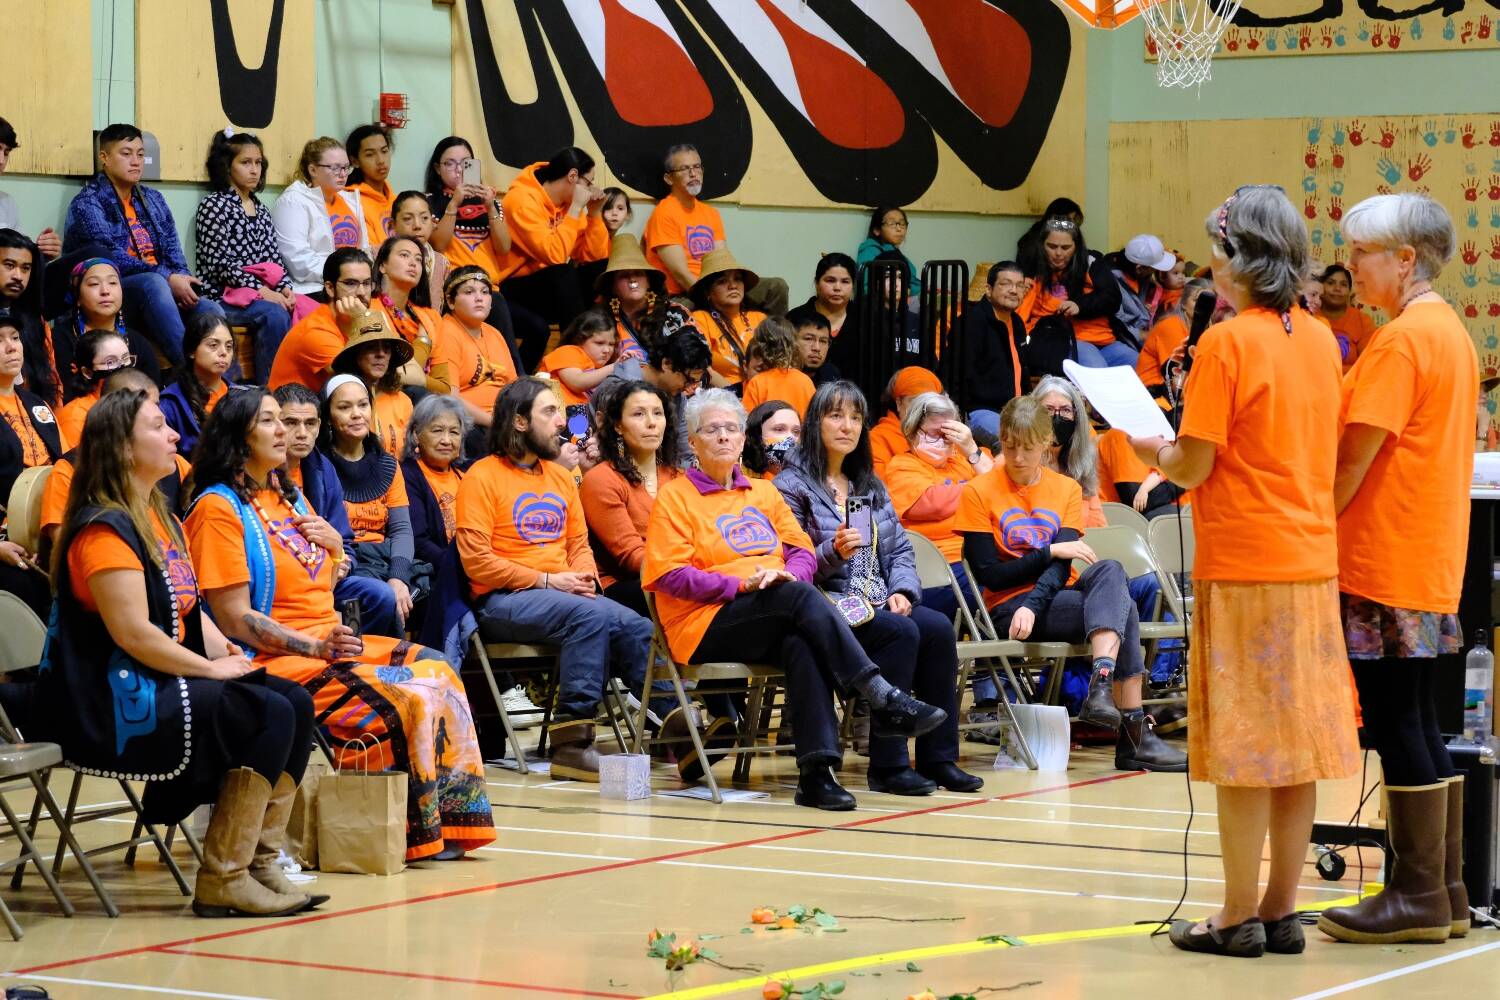 Jan Bronson of Anchorage and Cathy Walling of Fairbanks, representing the Alaska Friends Conference, apologize to Alaska Native communities for the boarding schools it ran in Alaska and the United States. The apology took place at Sayéik Gastineau elementary school, the former site of a Quaker mission school in Juneau, during Orange Shirt Day, Sept. 30, 2022. (Lisa Phu/Alaska Beacon)